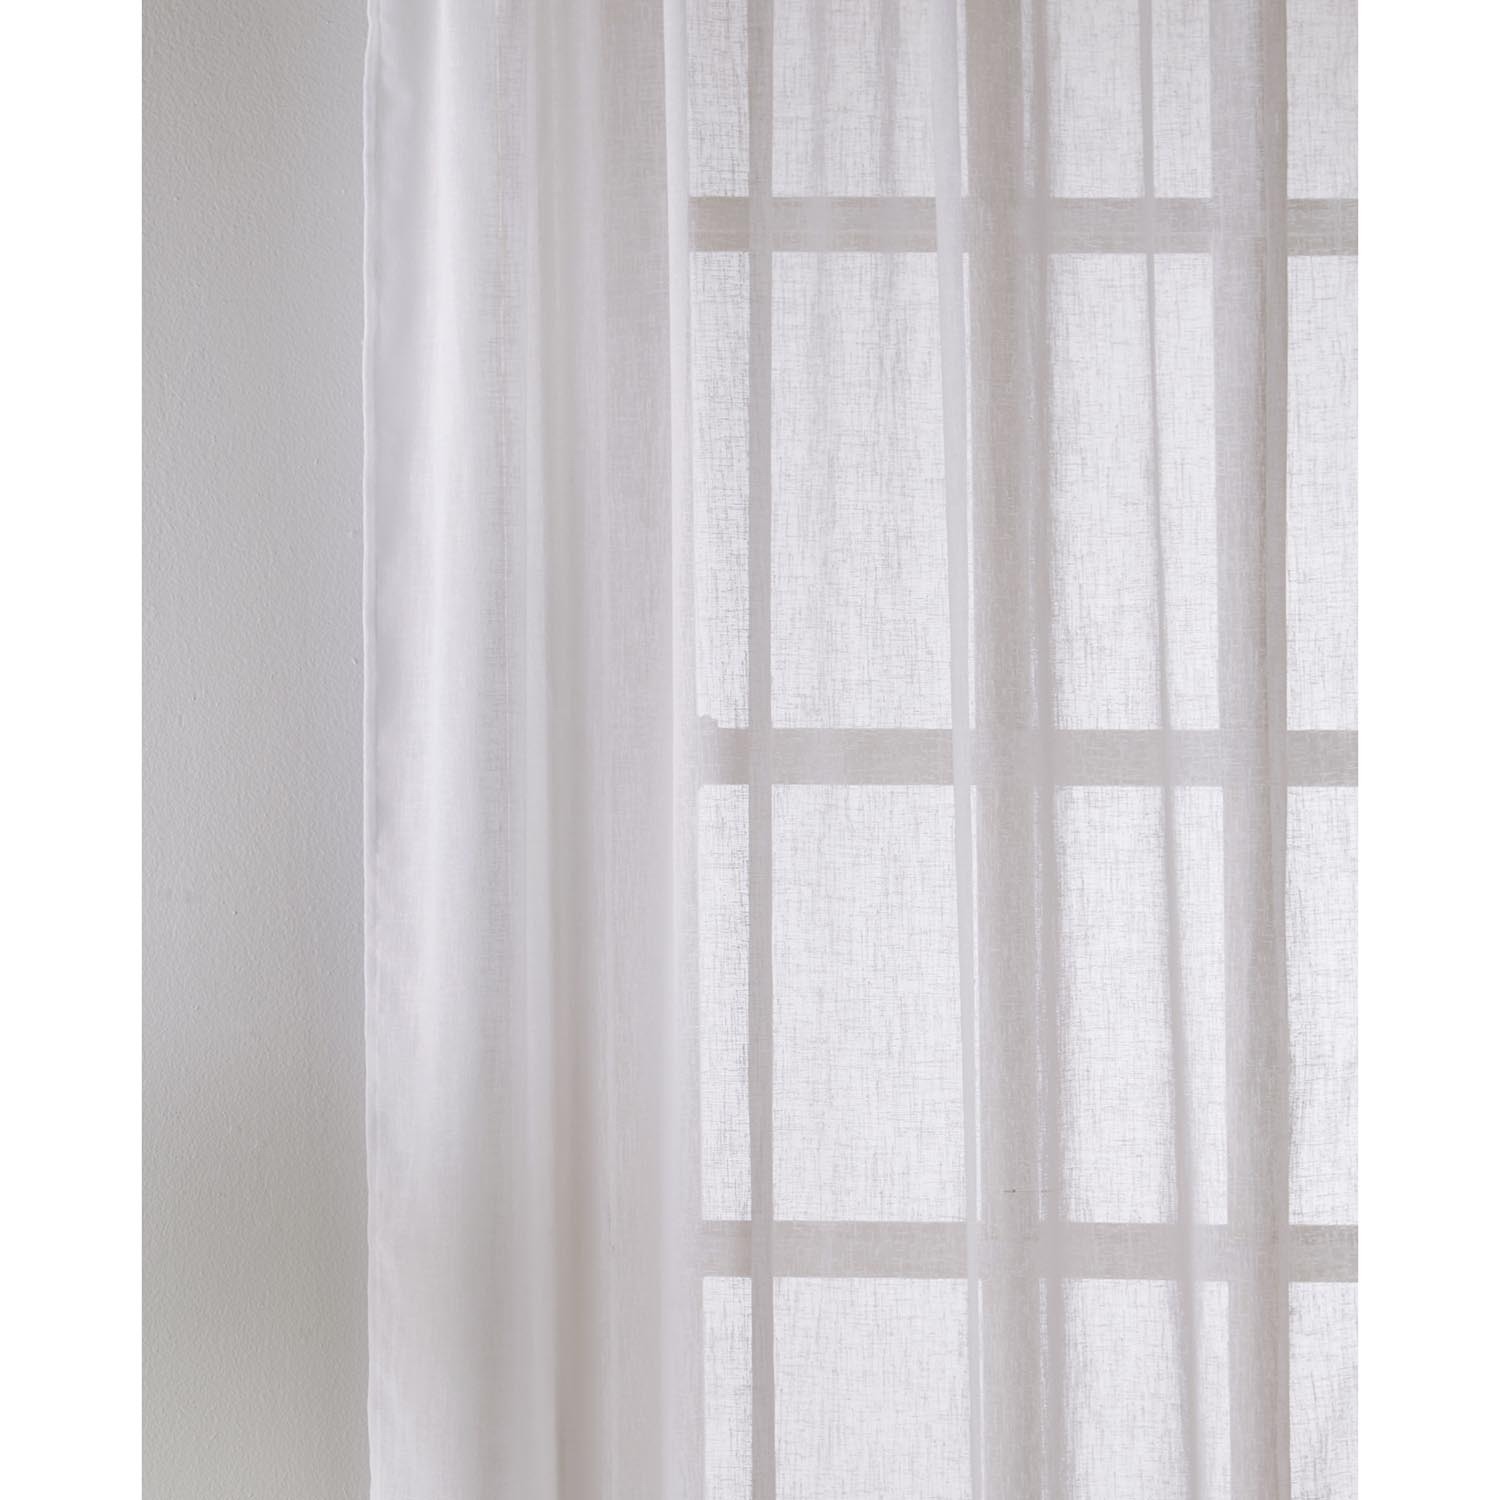 Eden Recycled Textured Voile - White / 183cm Image 2